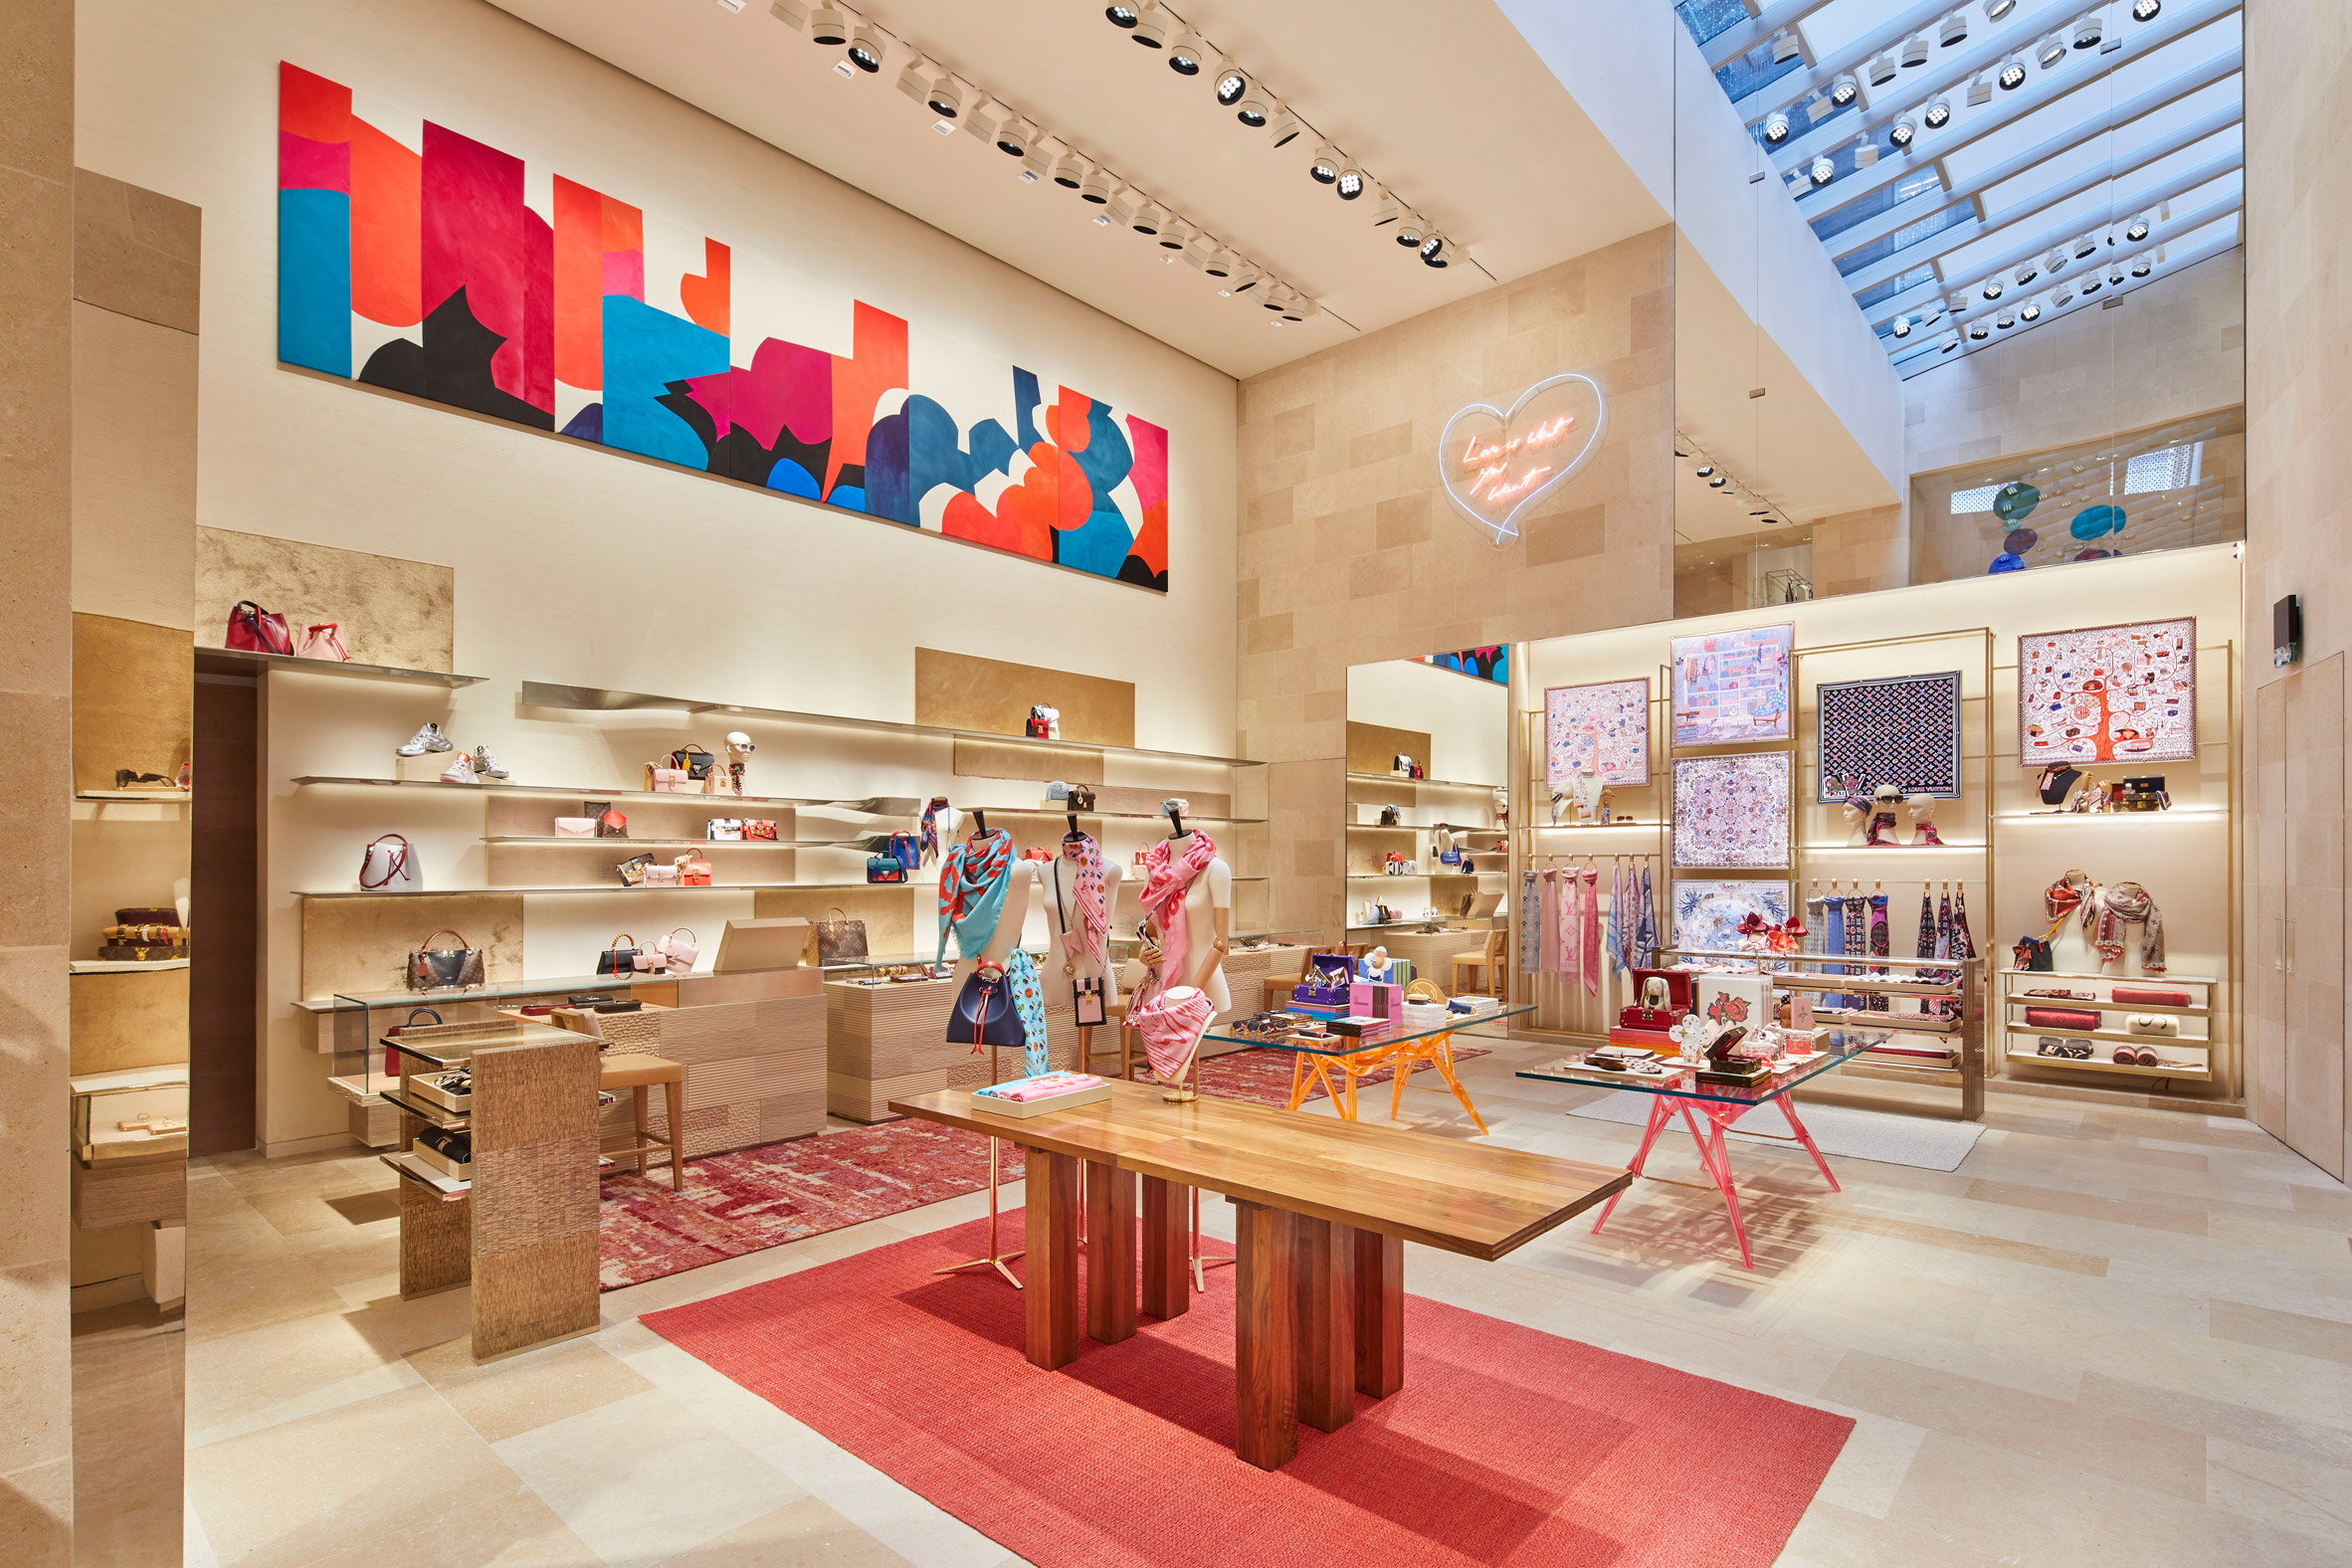 Louis Vitton's flagship store stands out with its red carpet and cool wooden design